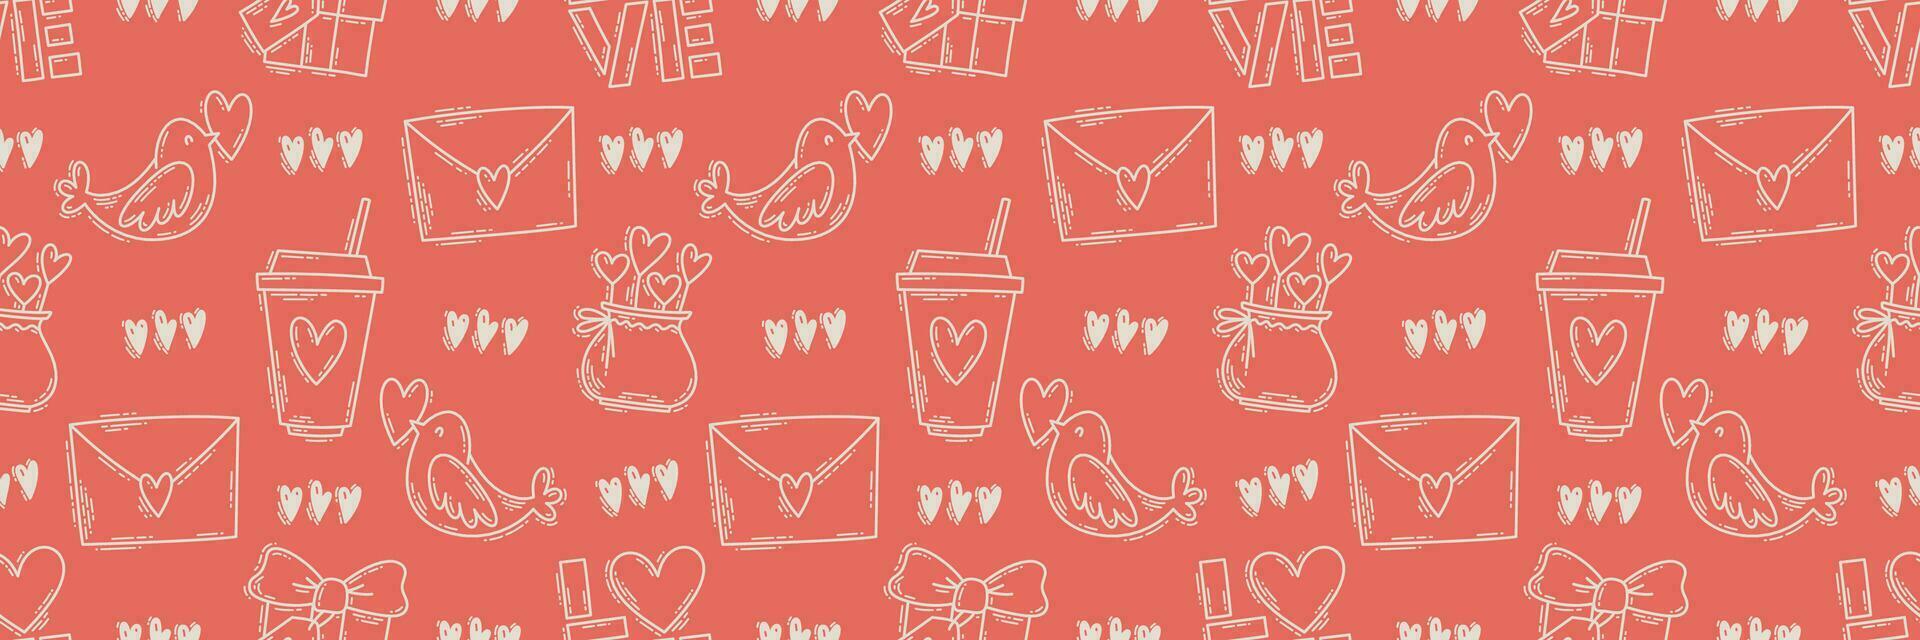 The love theme doodle style seamless pattern, Valentines Day hand-drawn color icons with a simple engraving retro effect. Romantic mood, cute symbols and elements backgrounds collection. vector